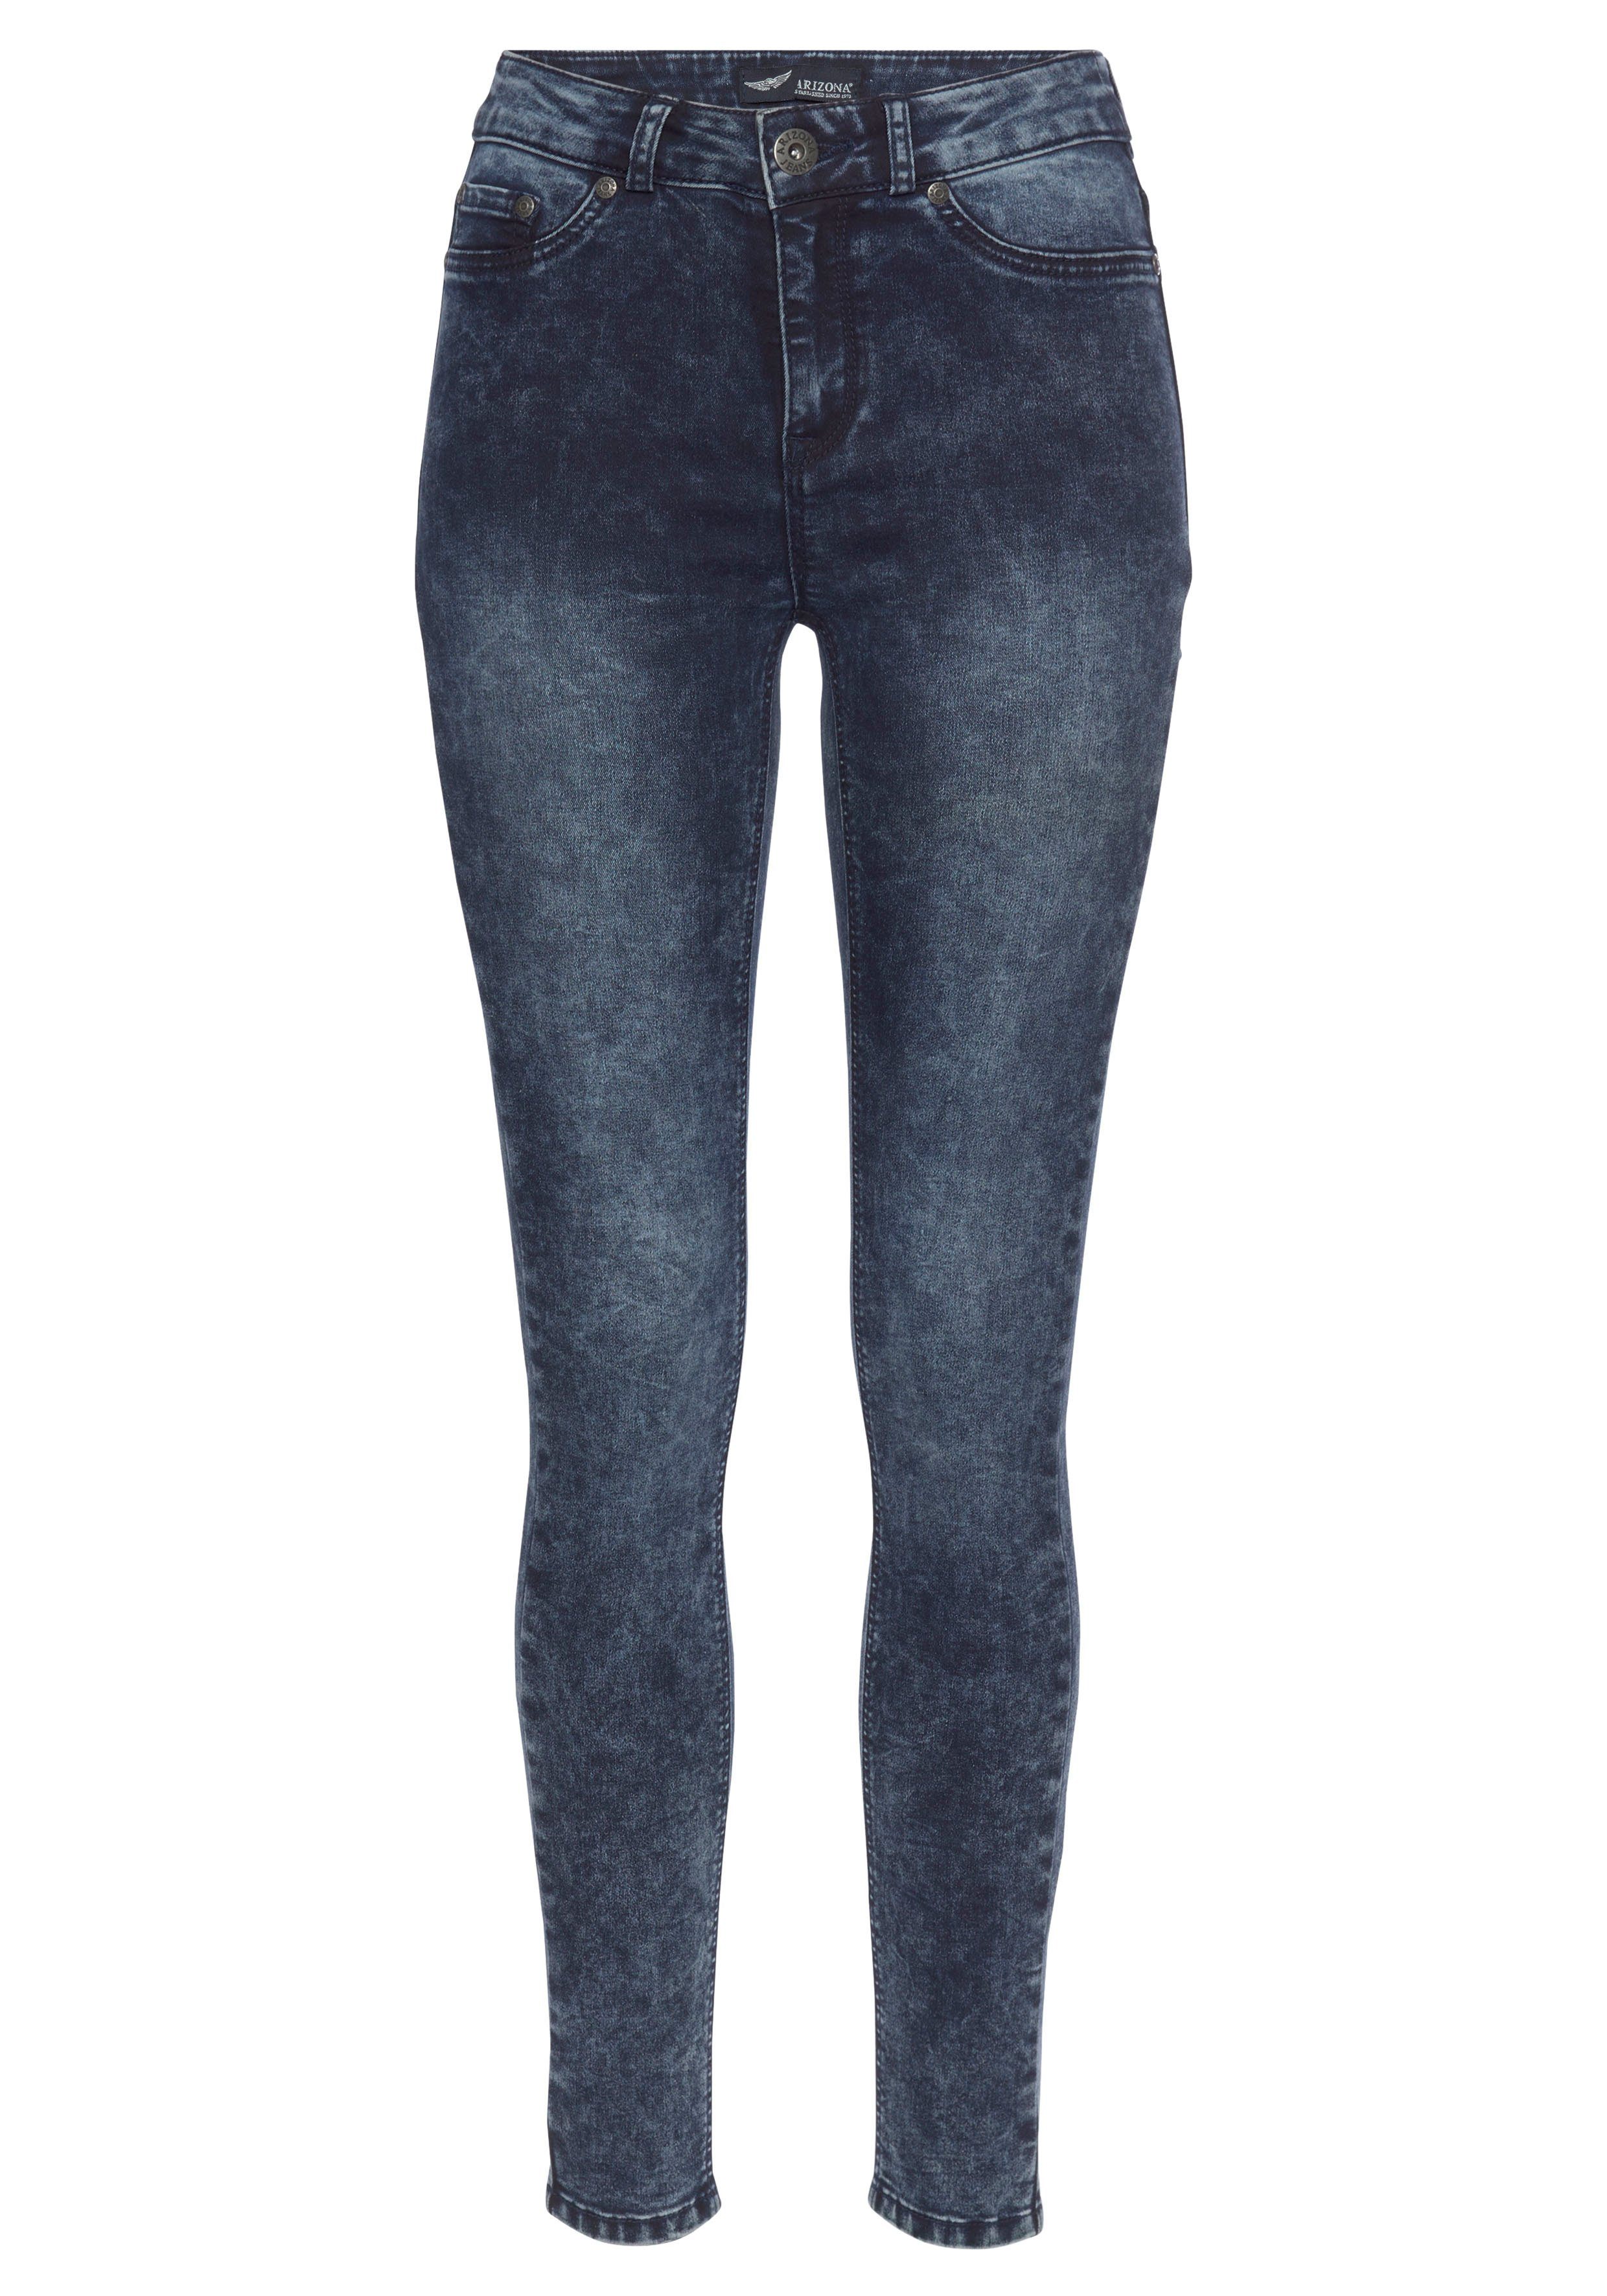 Jeans moon washed Arizona darkblue-moonwashed Stretch Moonwashed Ultra Skinny-fit-Jeans